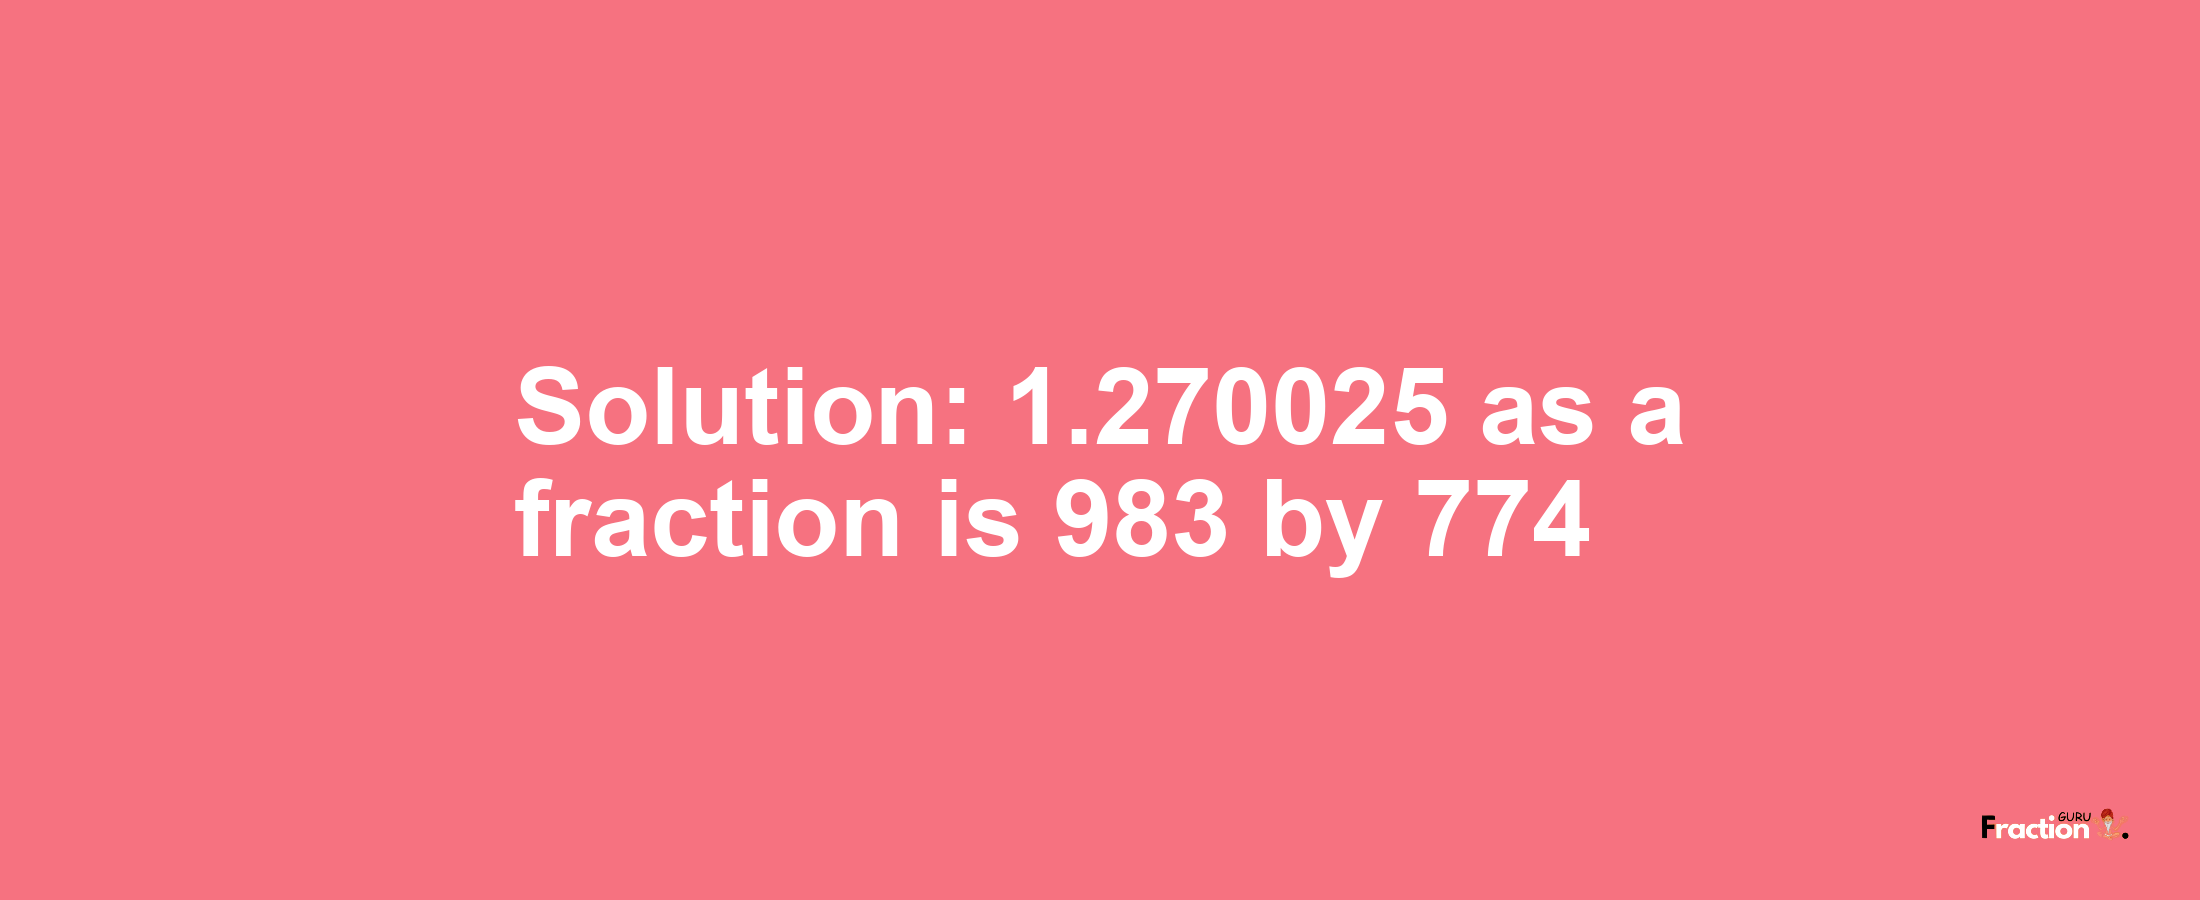 Solution:1.270025 as a fraction is 983/774